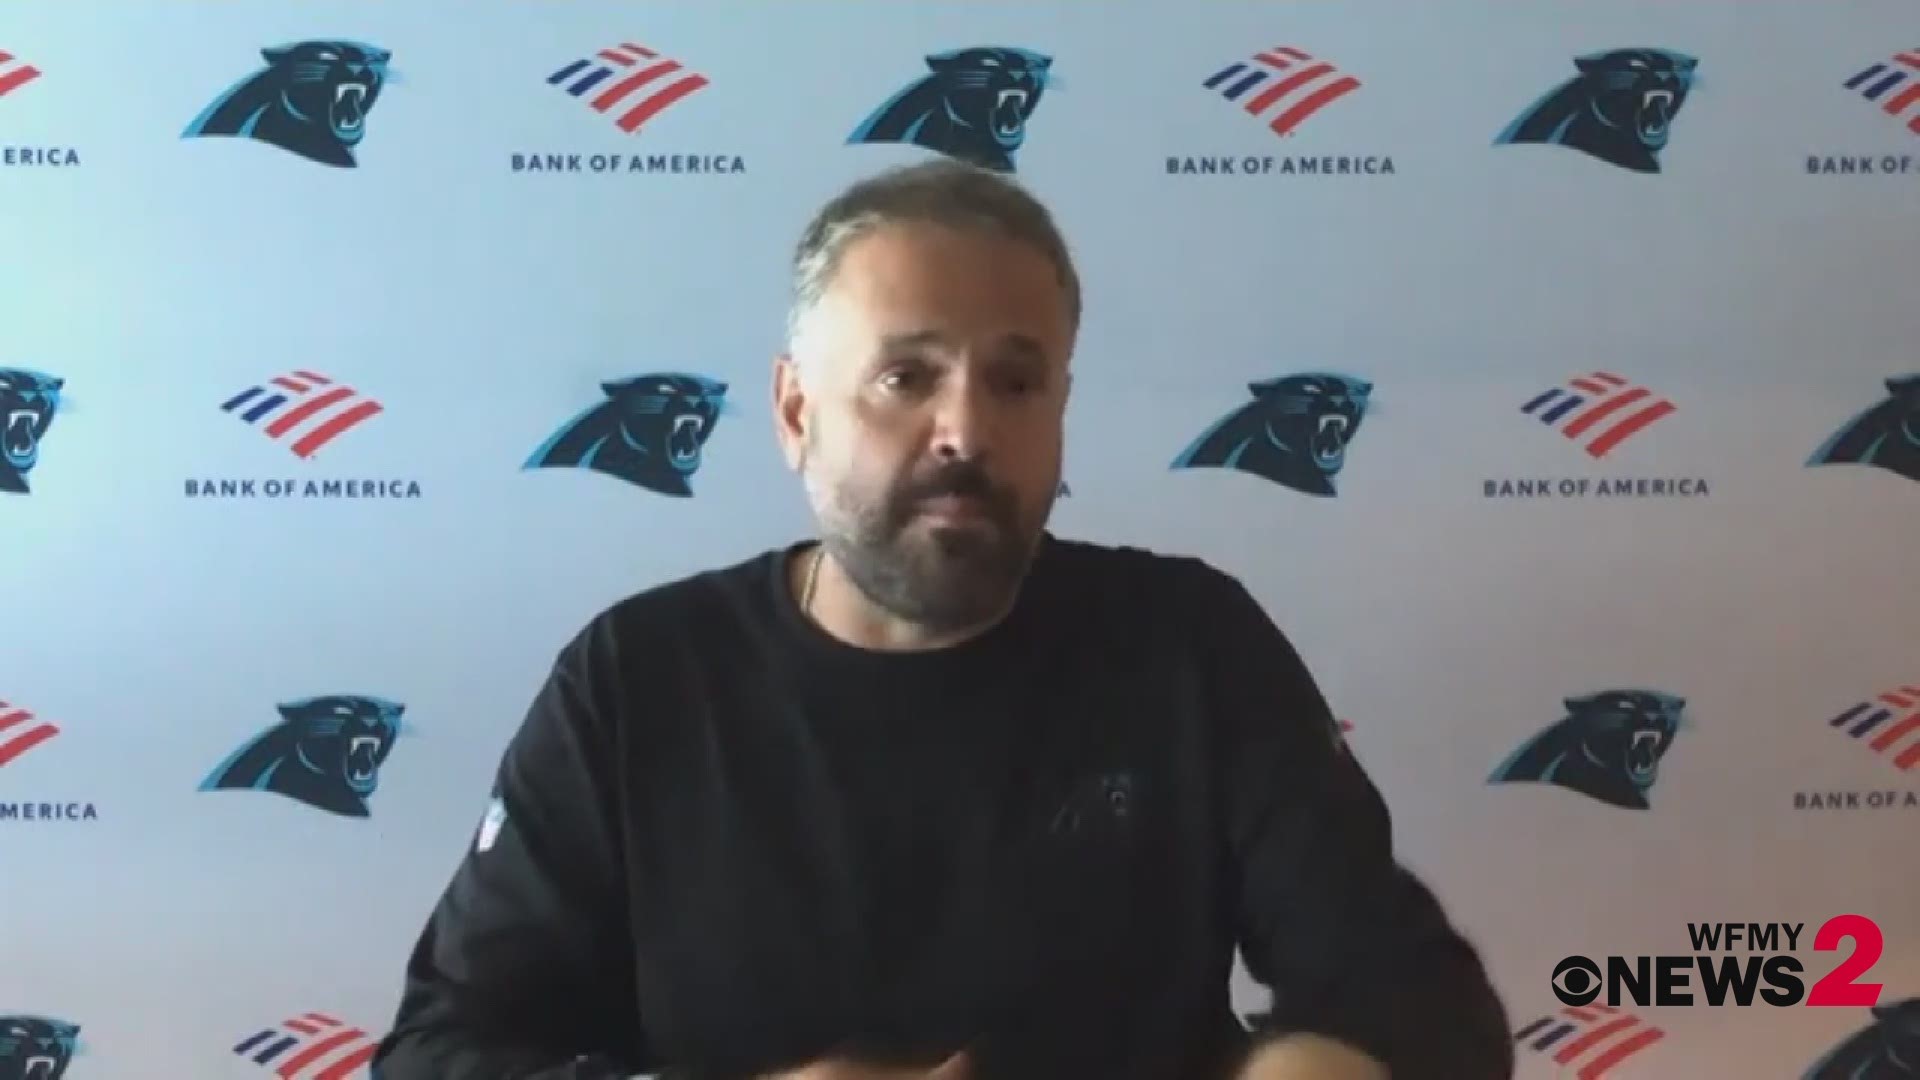 Panthers Head Coach Matt Rhule said the team has contact tracers to enforce social distancing. Players said they're being proactive and taking health seriously.